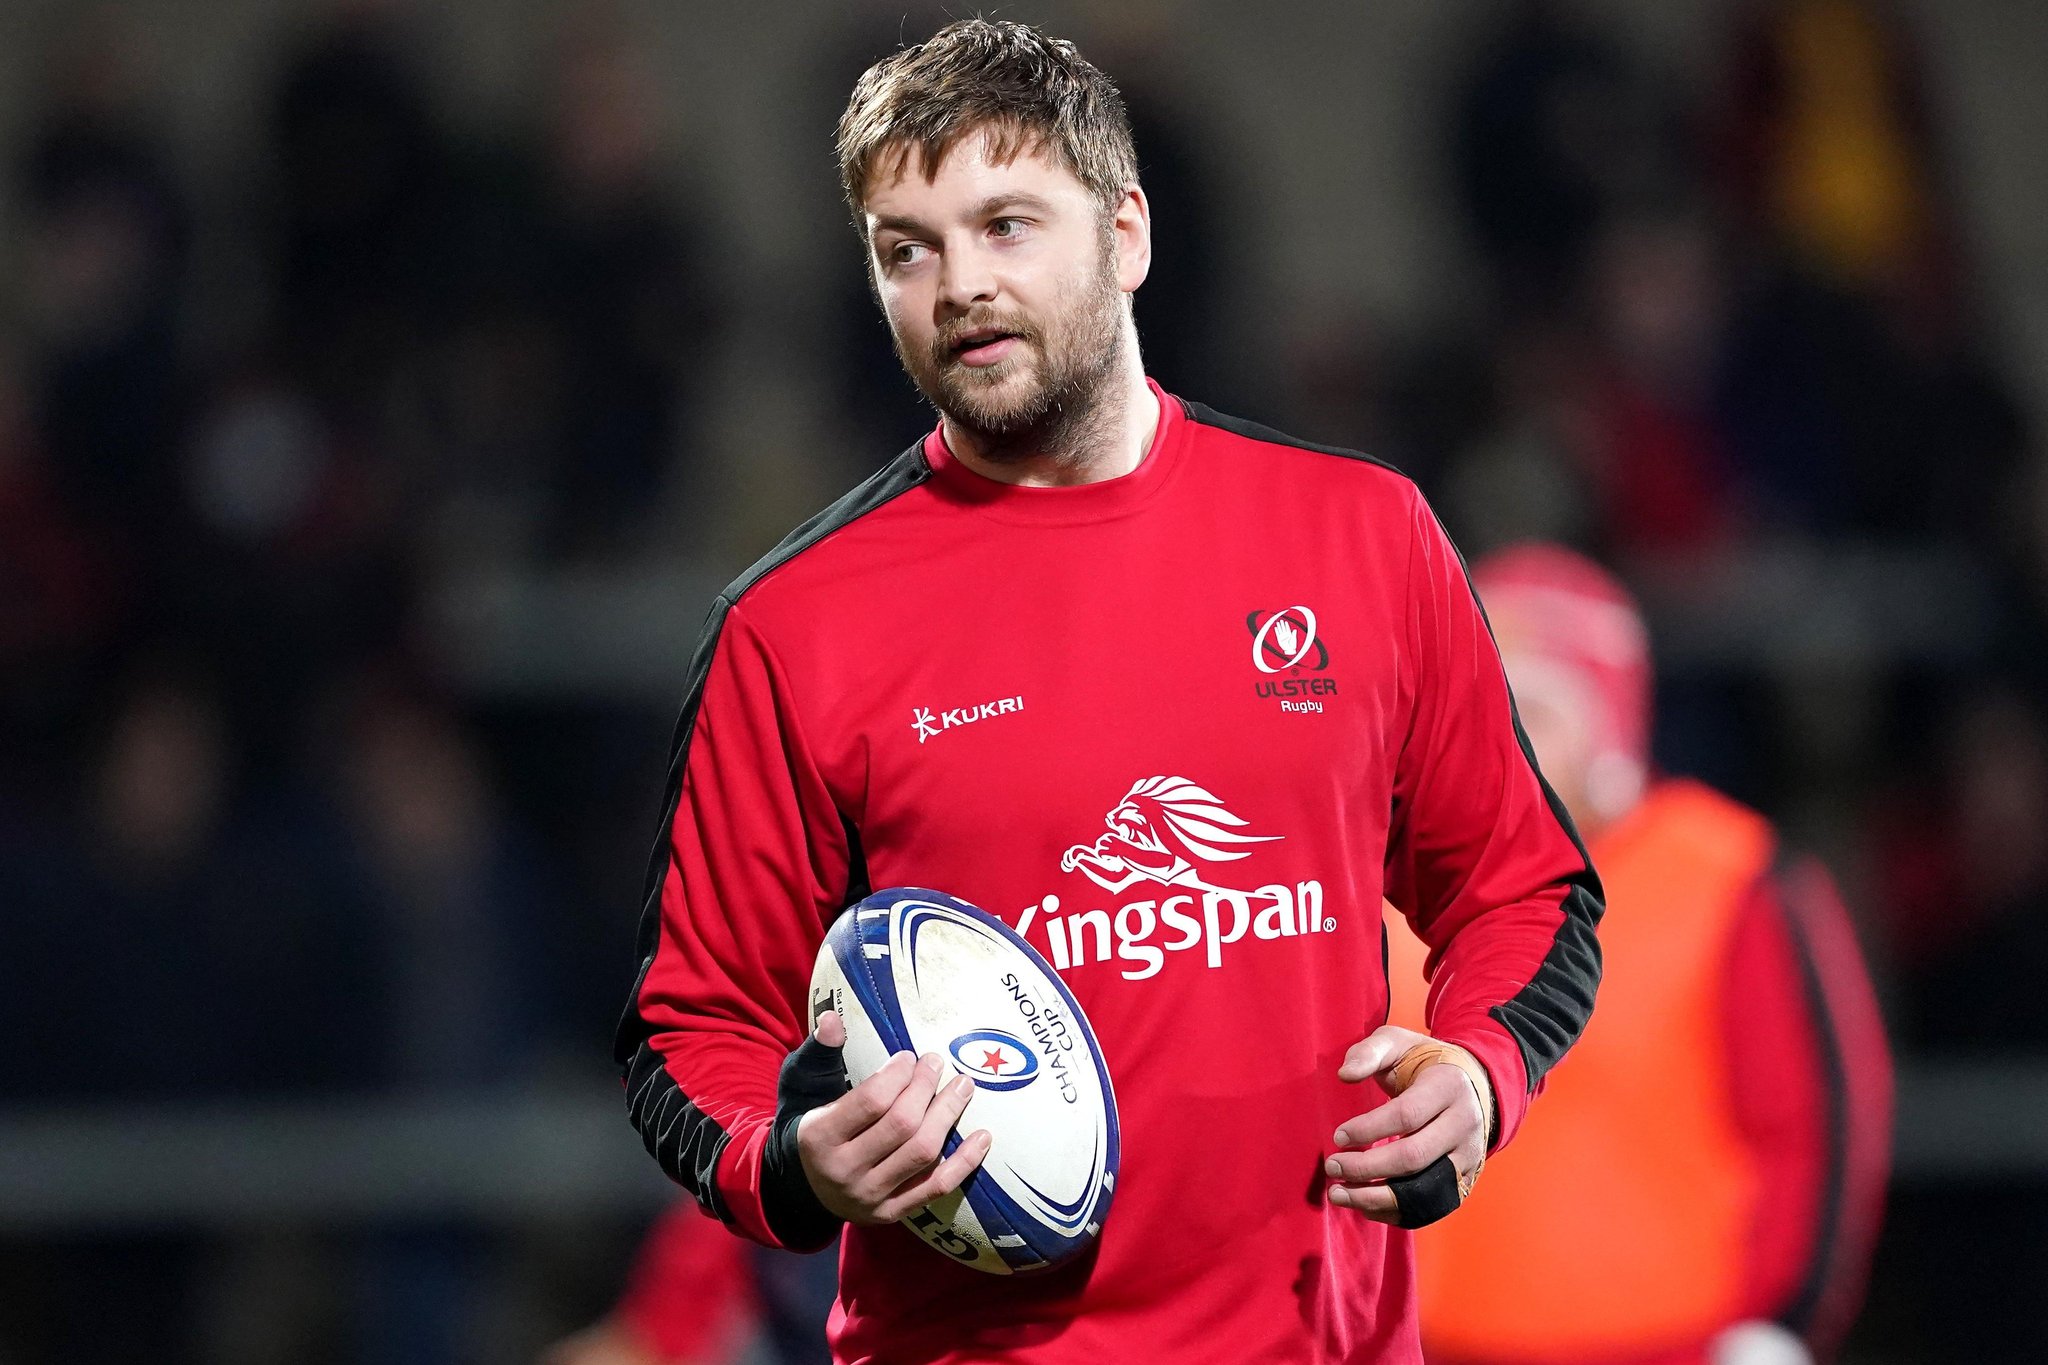 Ulster skipper Iain Henderson says mix of factors to blame for defeats